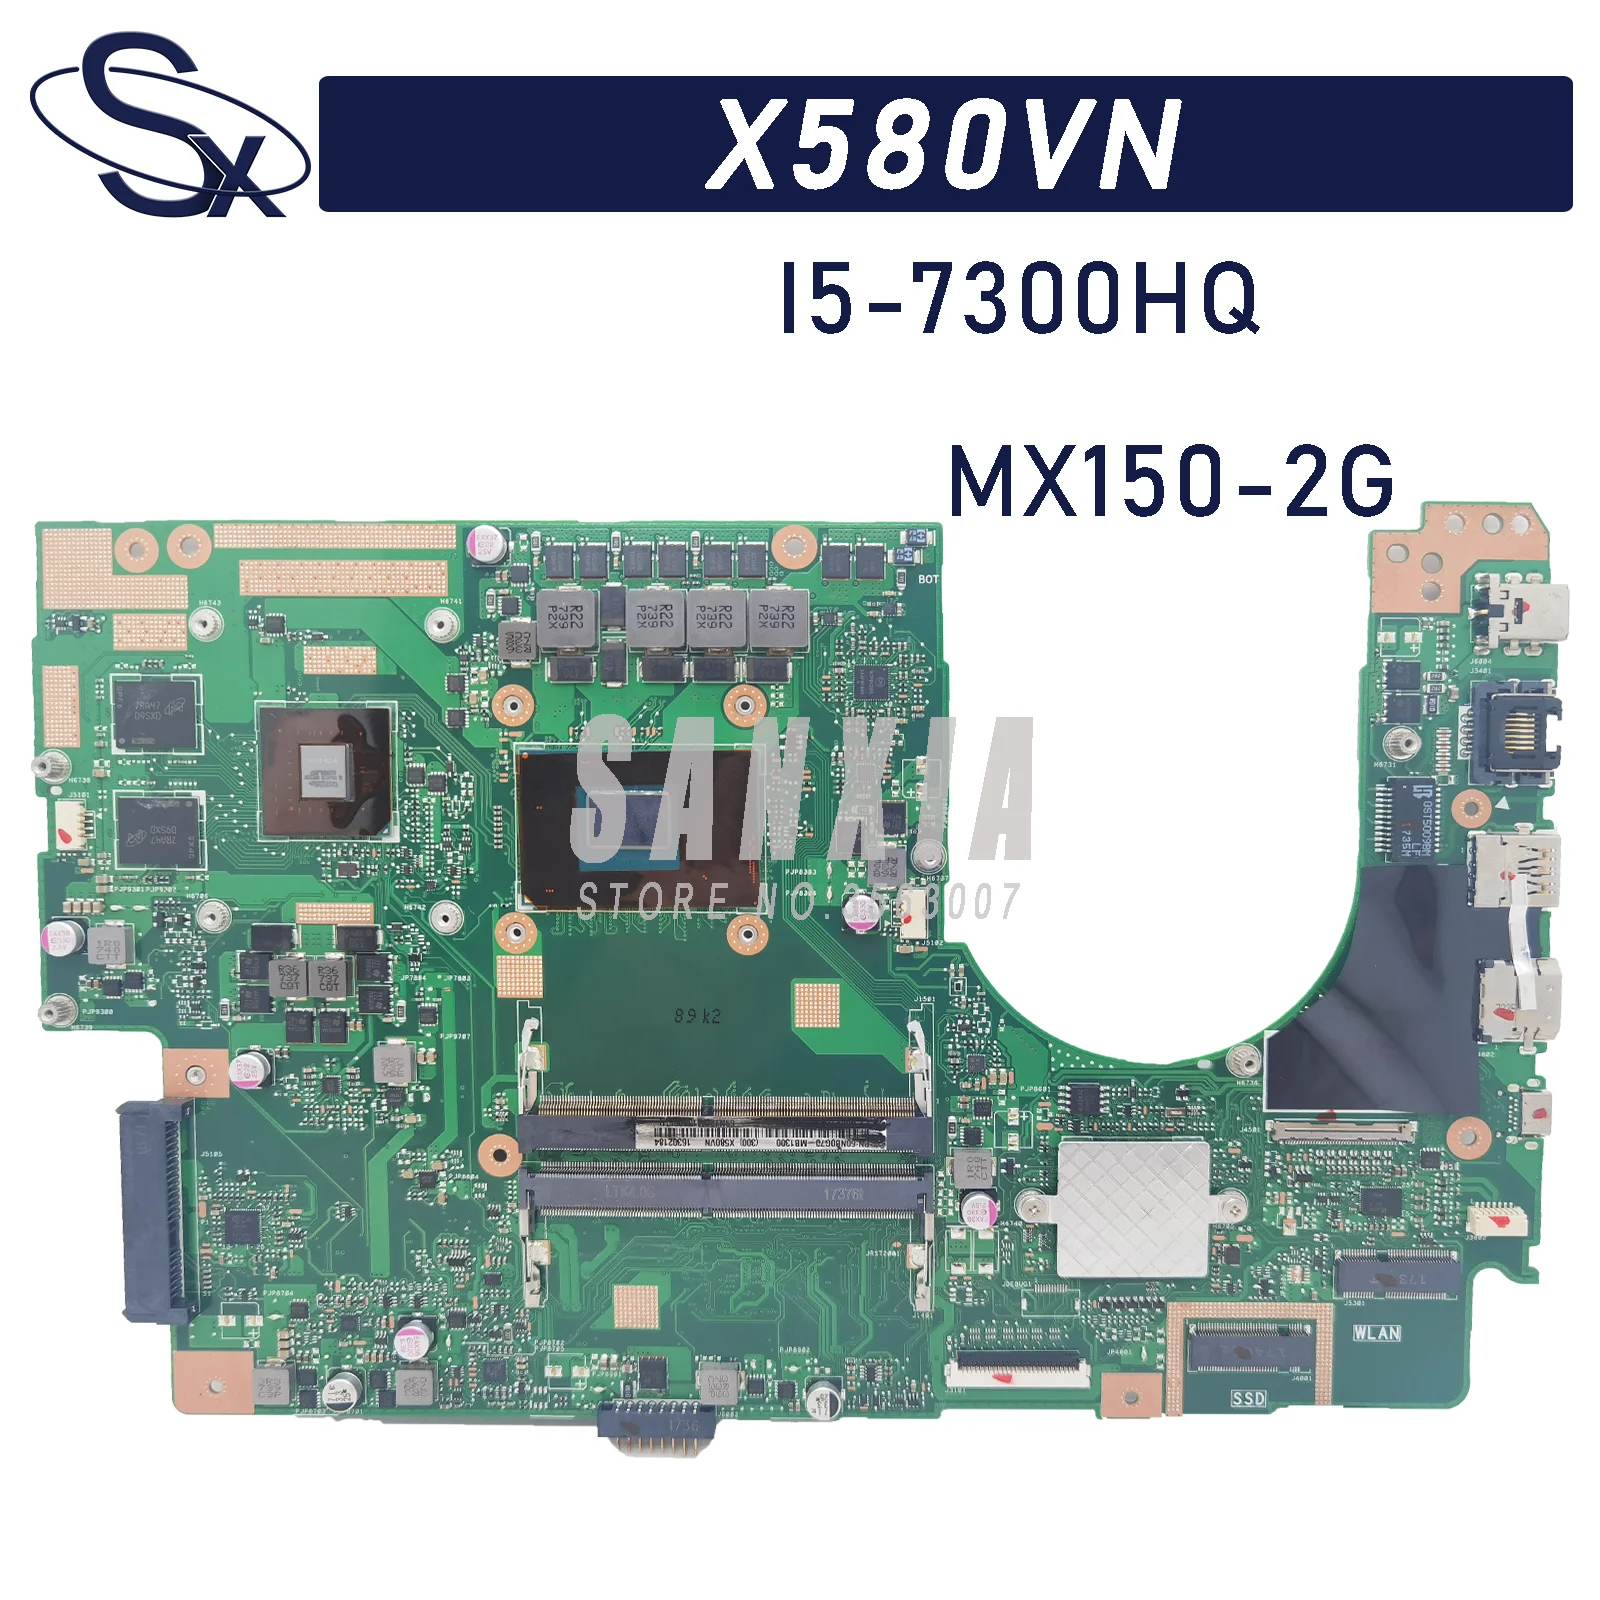 

KEFU X580VN is suitable for ASUS NX580VN NX580VD X580VD X580V X580VN laptop motherboard HM175 I5-7300HQ MX150-2GB 100% test OK